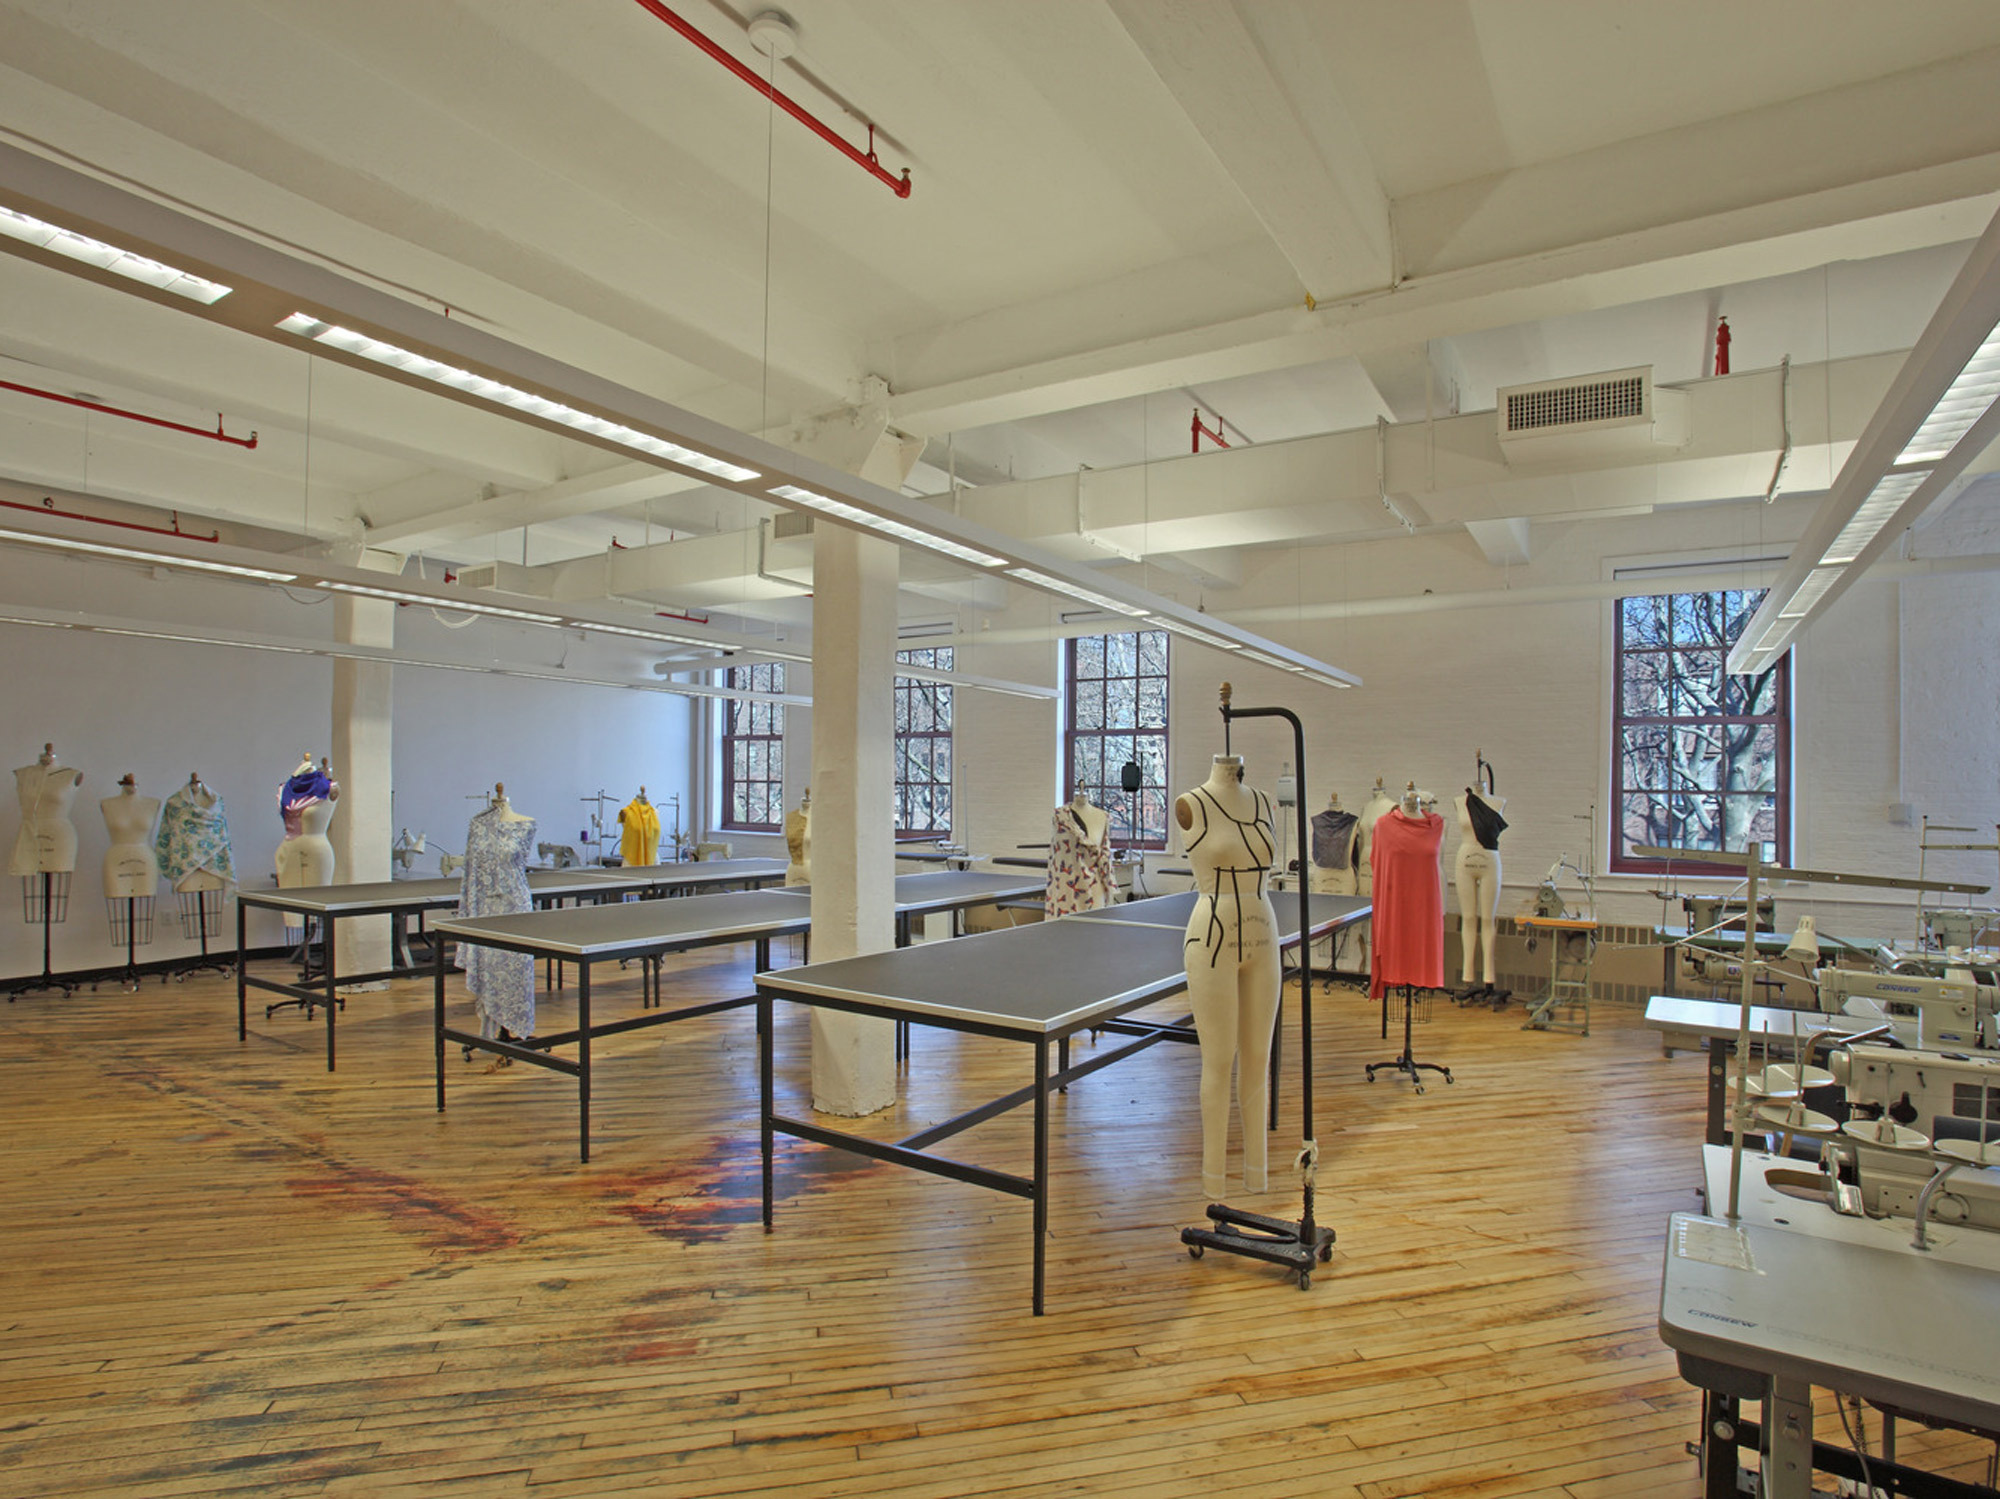 Spacious fashion design studio with bright natural light, featuring stark white walls, high ceilings, and exposed beams. Workstations with sewing machines and dress forms are organized for functionality, while splashes of color on the distressed wooden floor add character to the creative workspace.